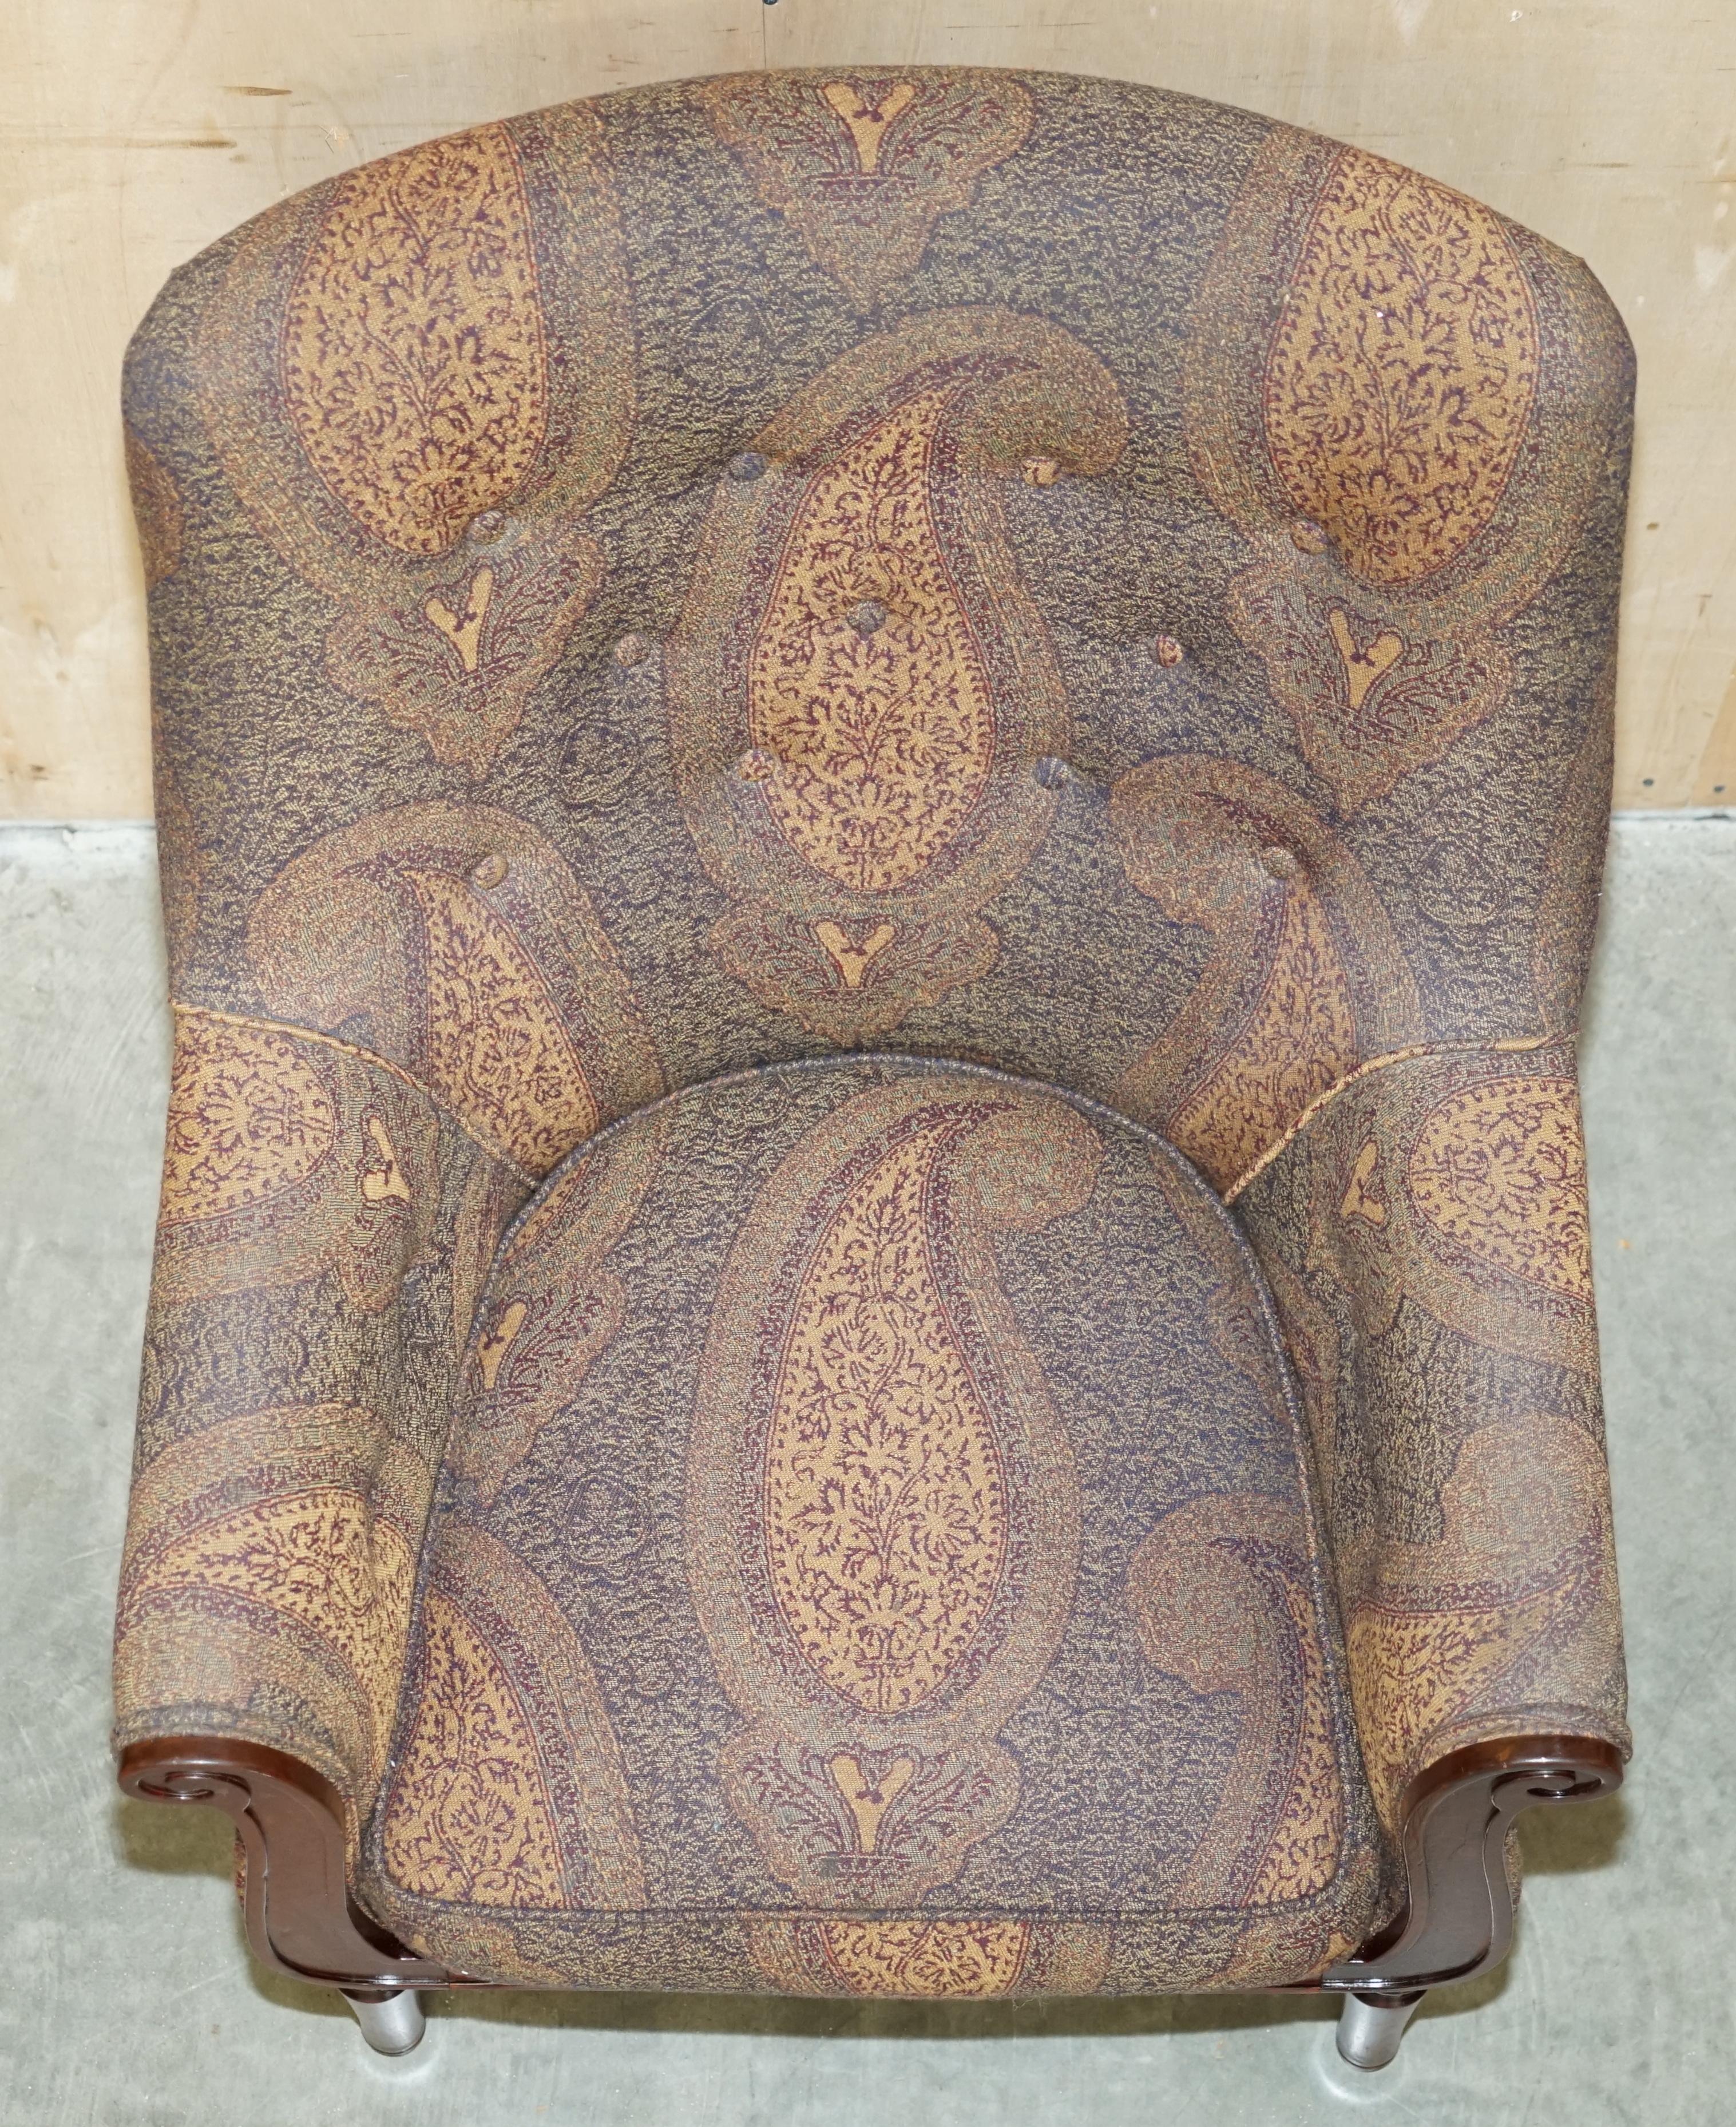 PAiR OF GEORGE SMITH WILLIAM IV LIBRARY ARMCHAIRS UNIQUE UPHOLSTERY 5